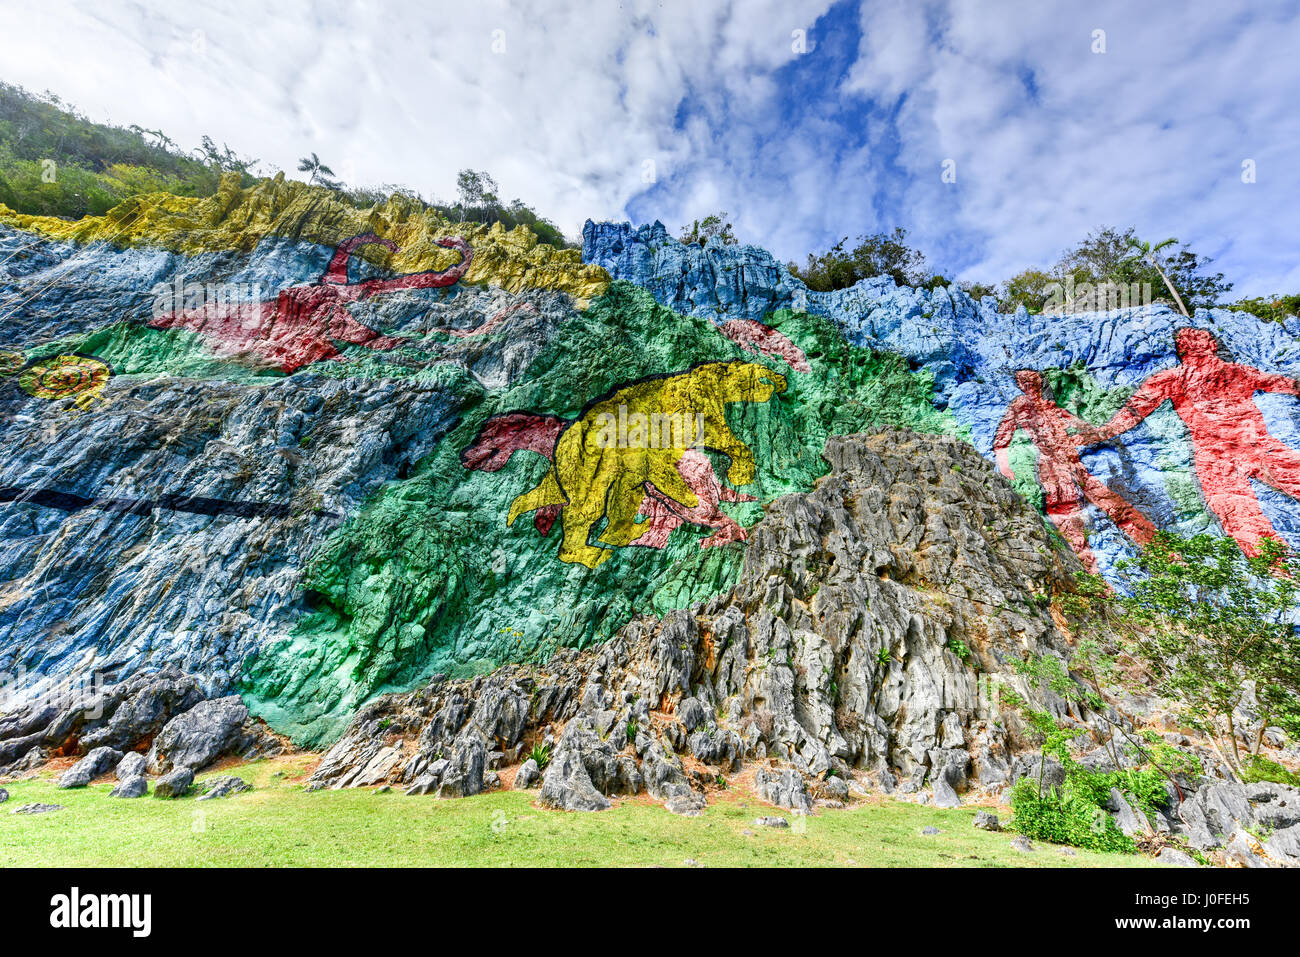 Mural de la Prehistoria, a giant mural painted on a cliff face in the Vinales area of Cuba. It is 120m long and took 18 people 4 years to complete. Stock Photo